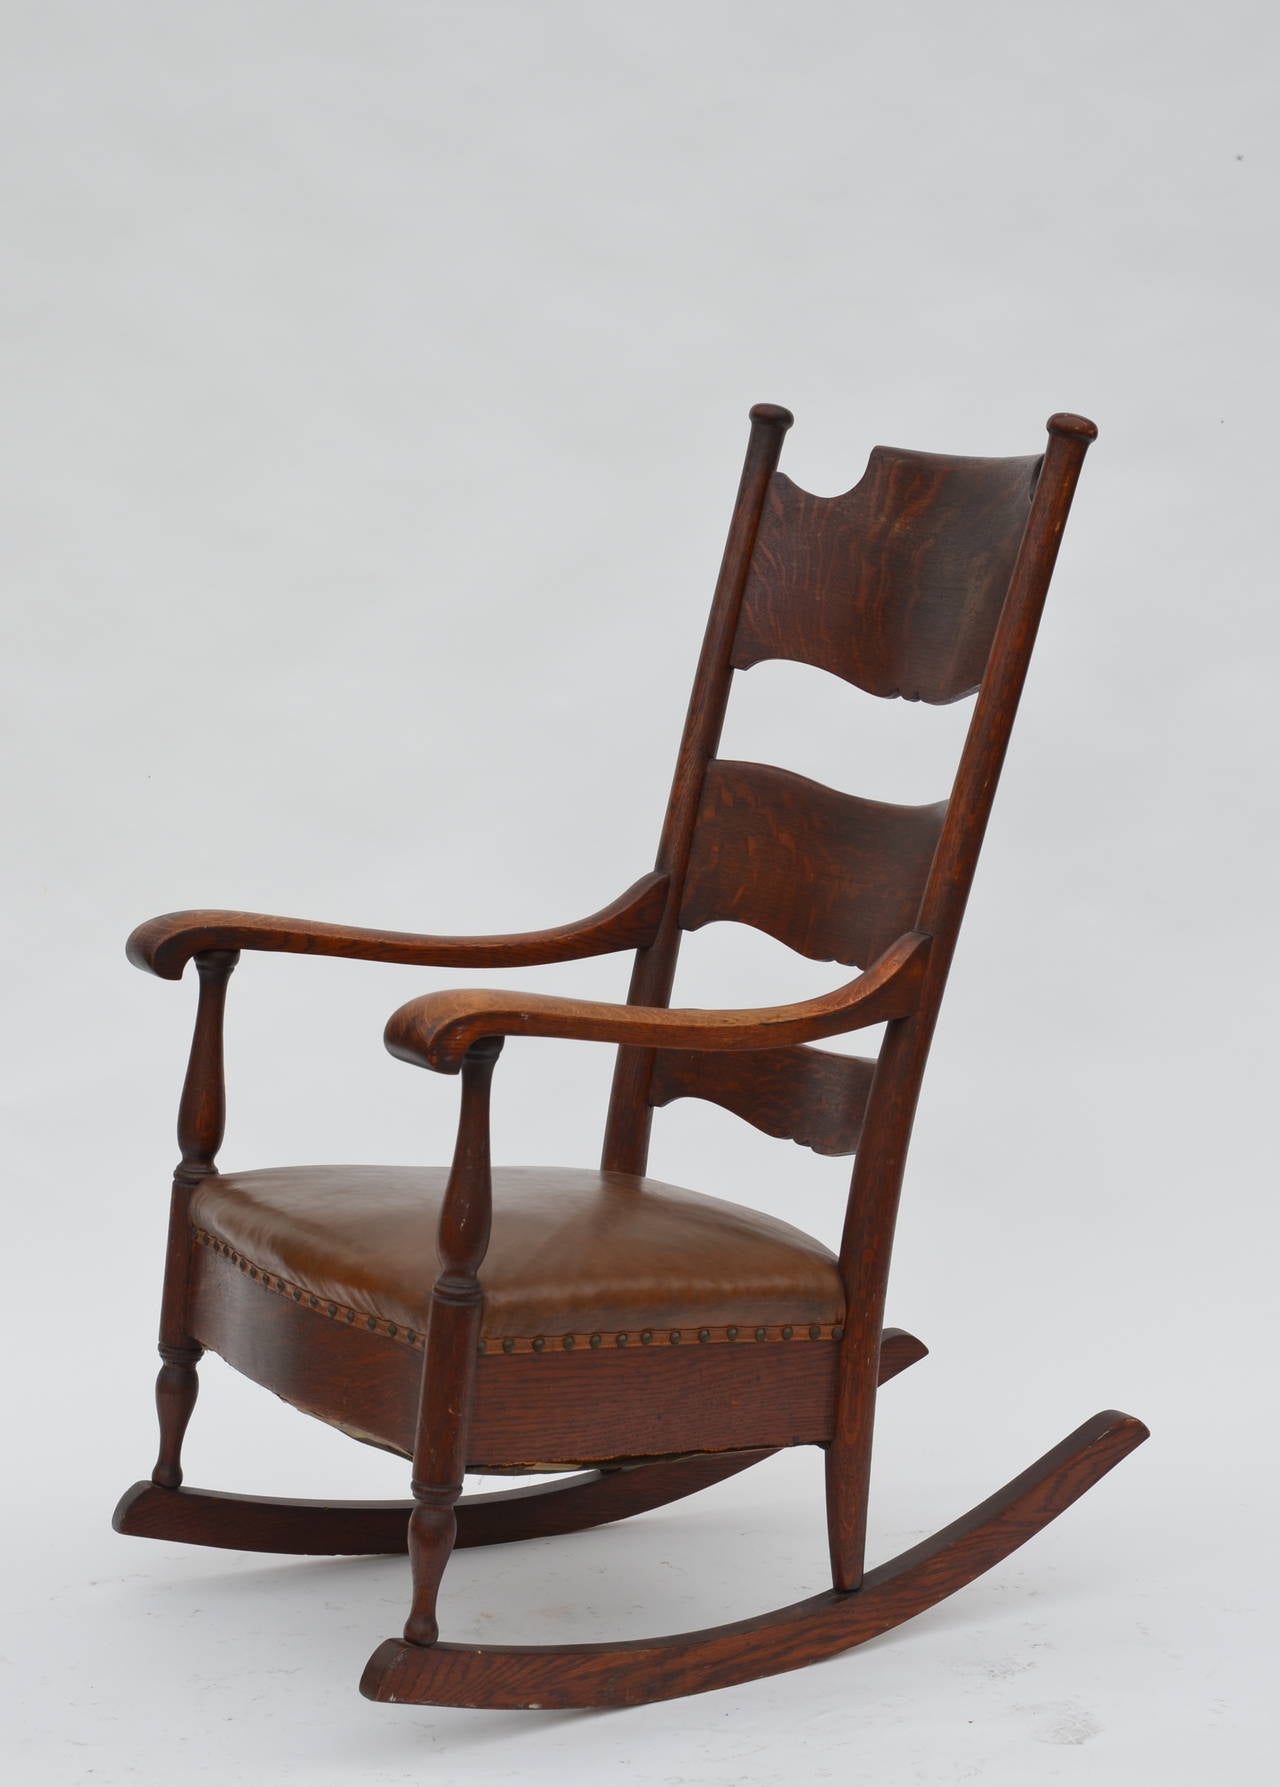 Large and Comfortable Arts & Crafts Rocking Chair. Amazing woodwork.